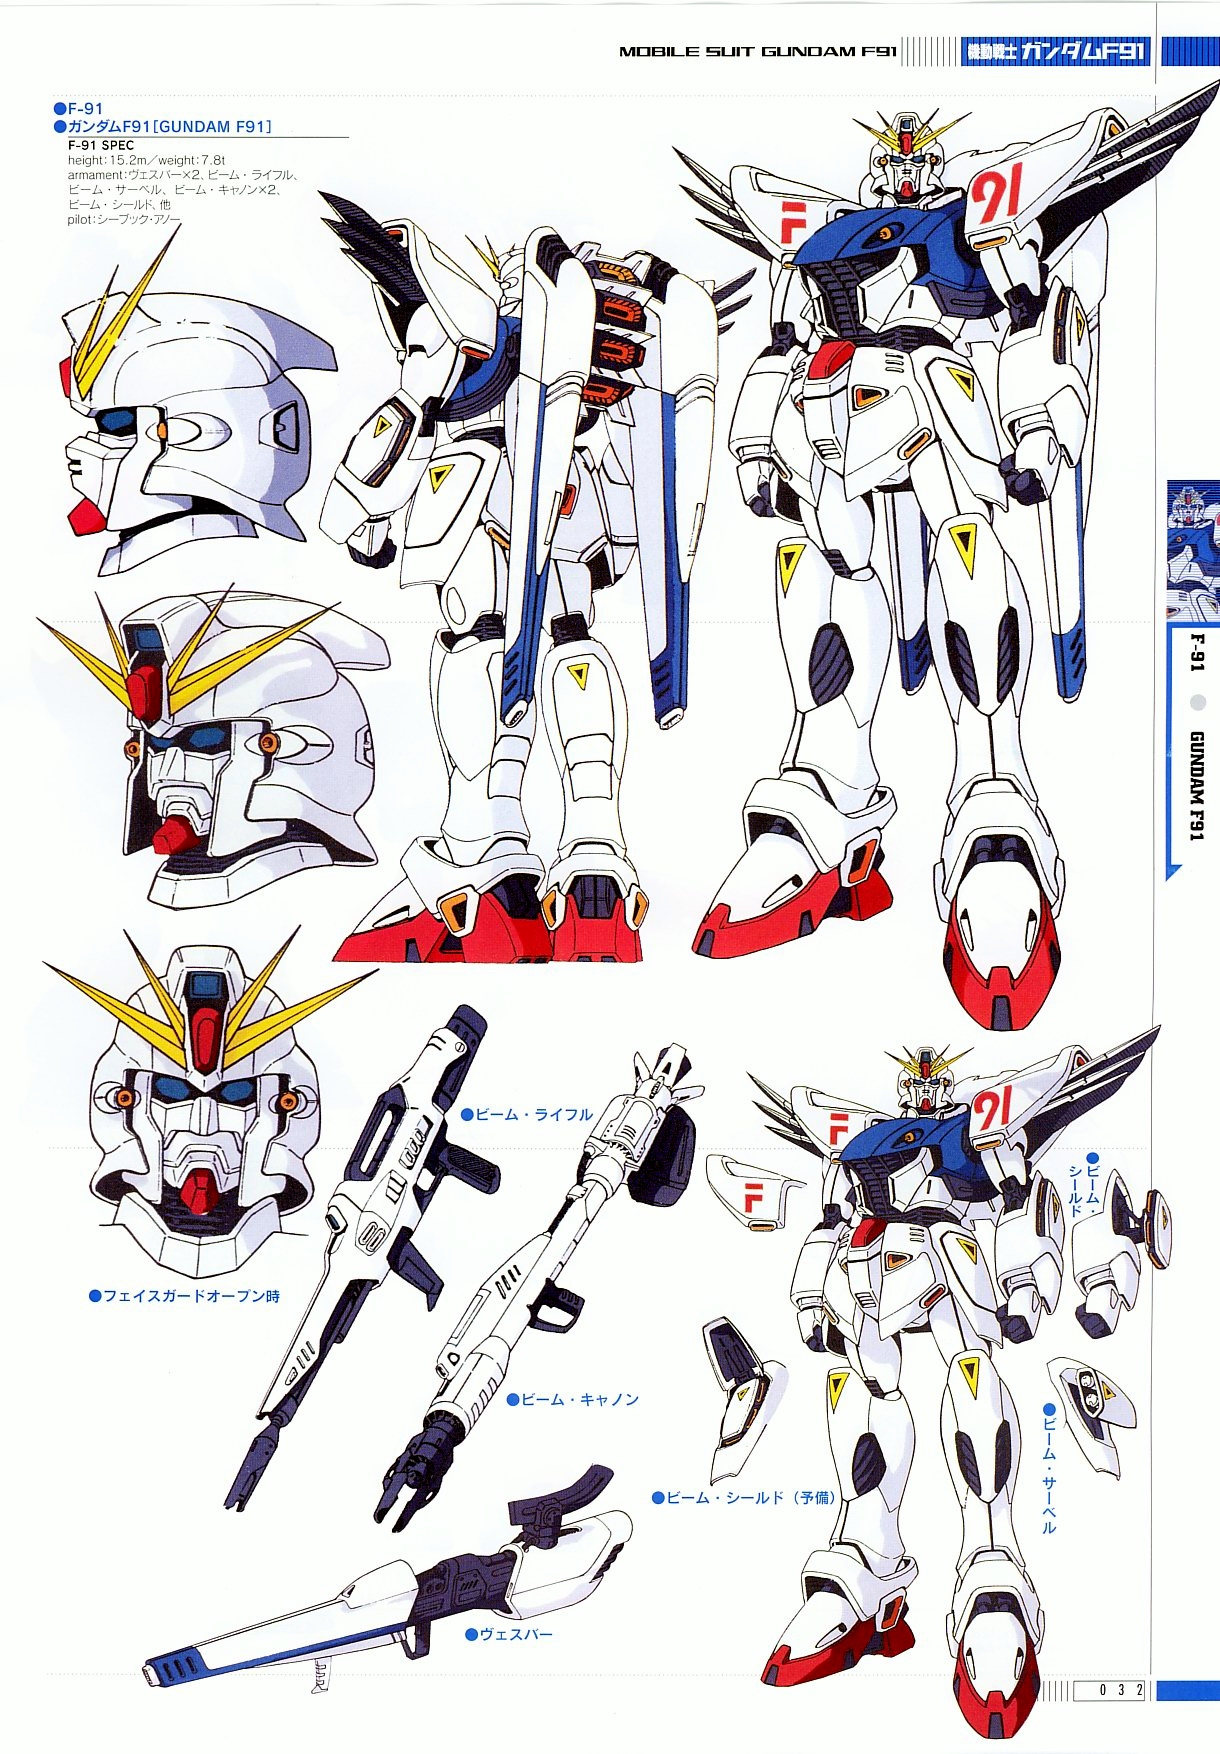 F91 Specifications and Design